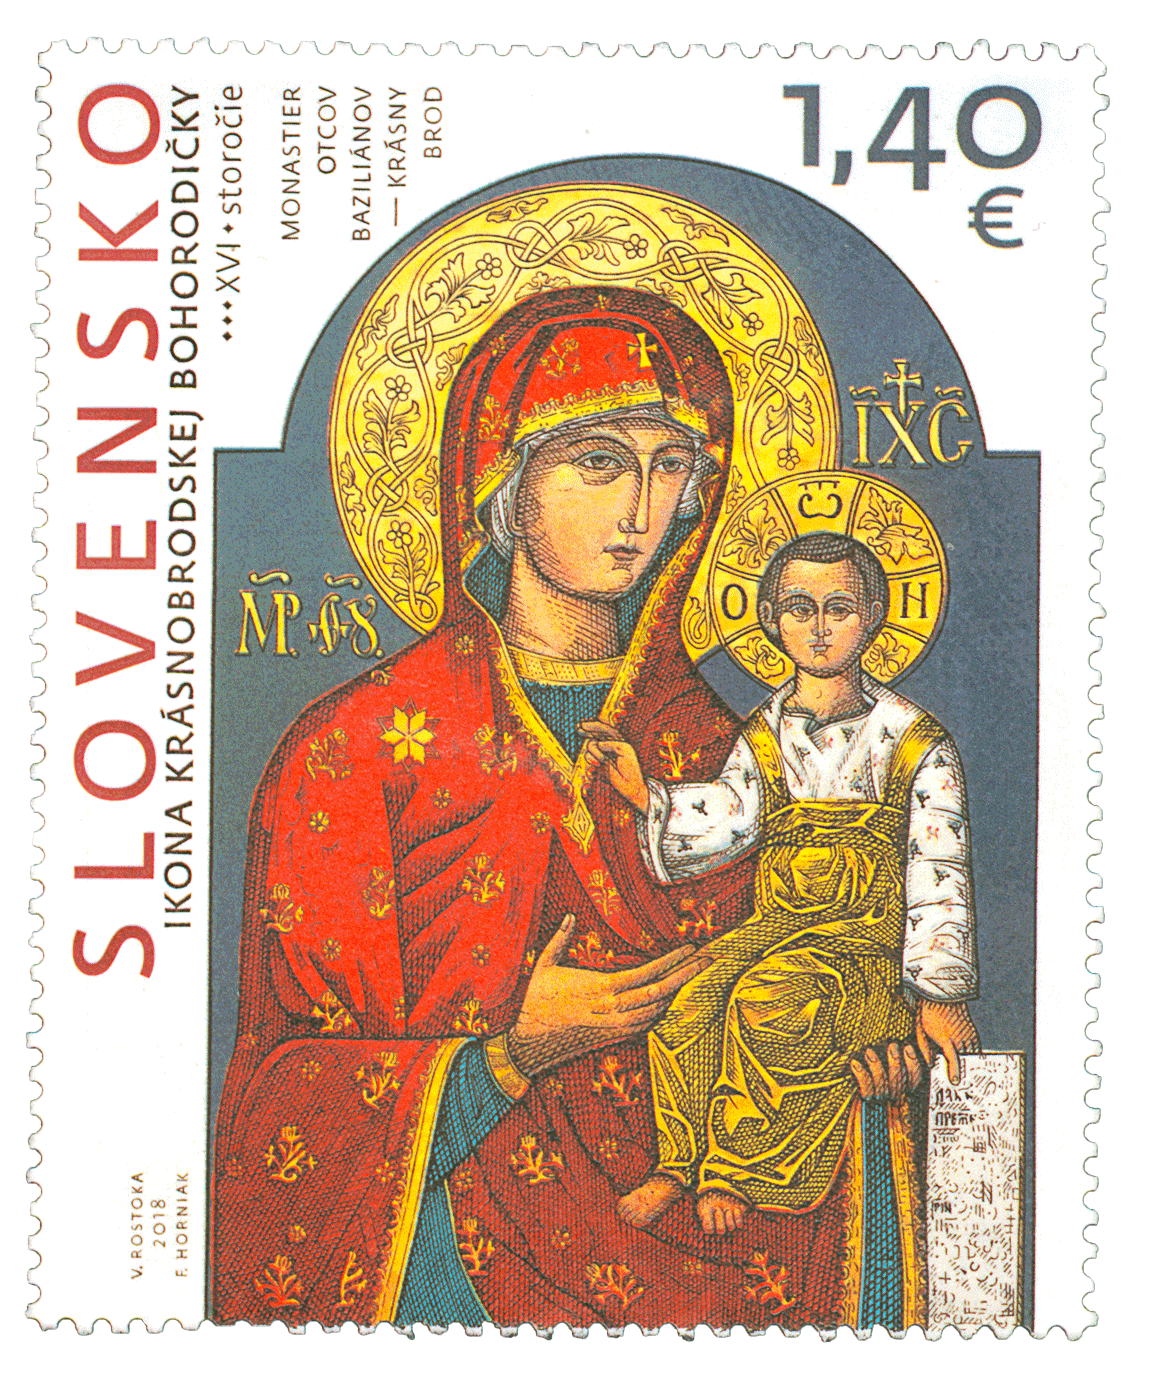 671 - ART: The Icon of Krásny Brod, The Mother of God